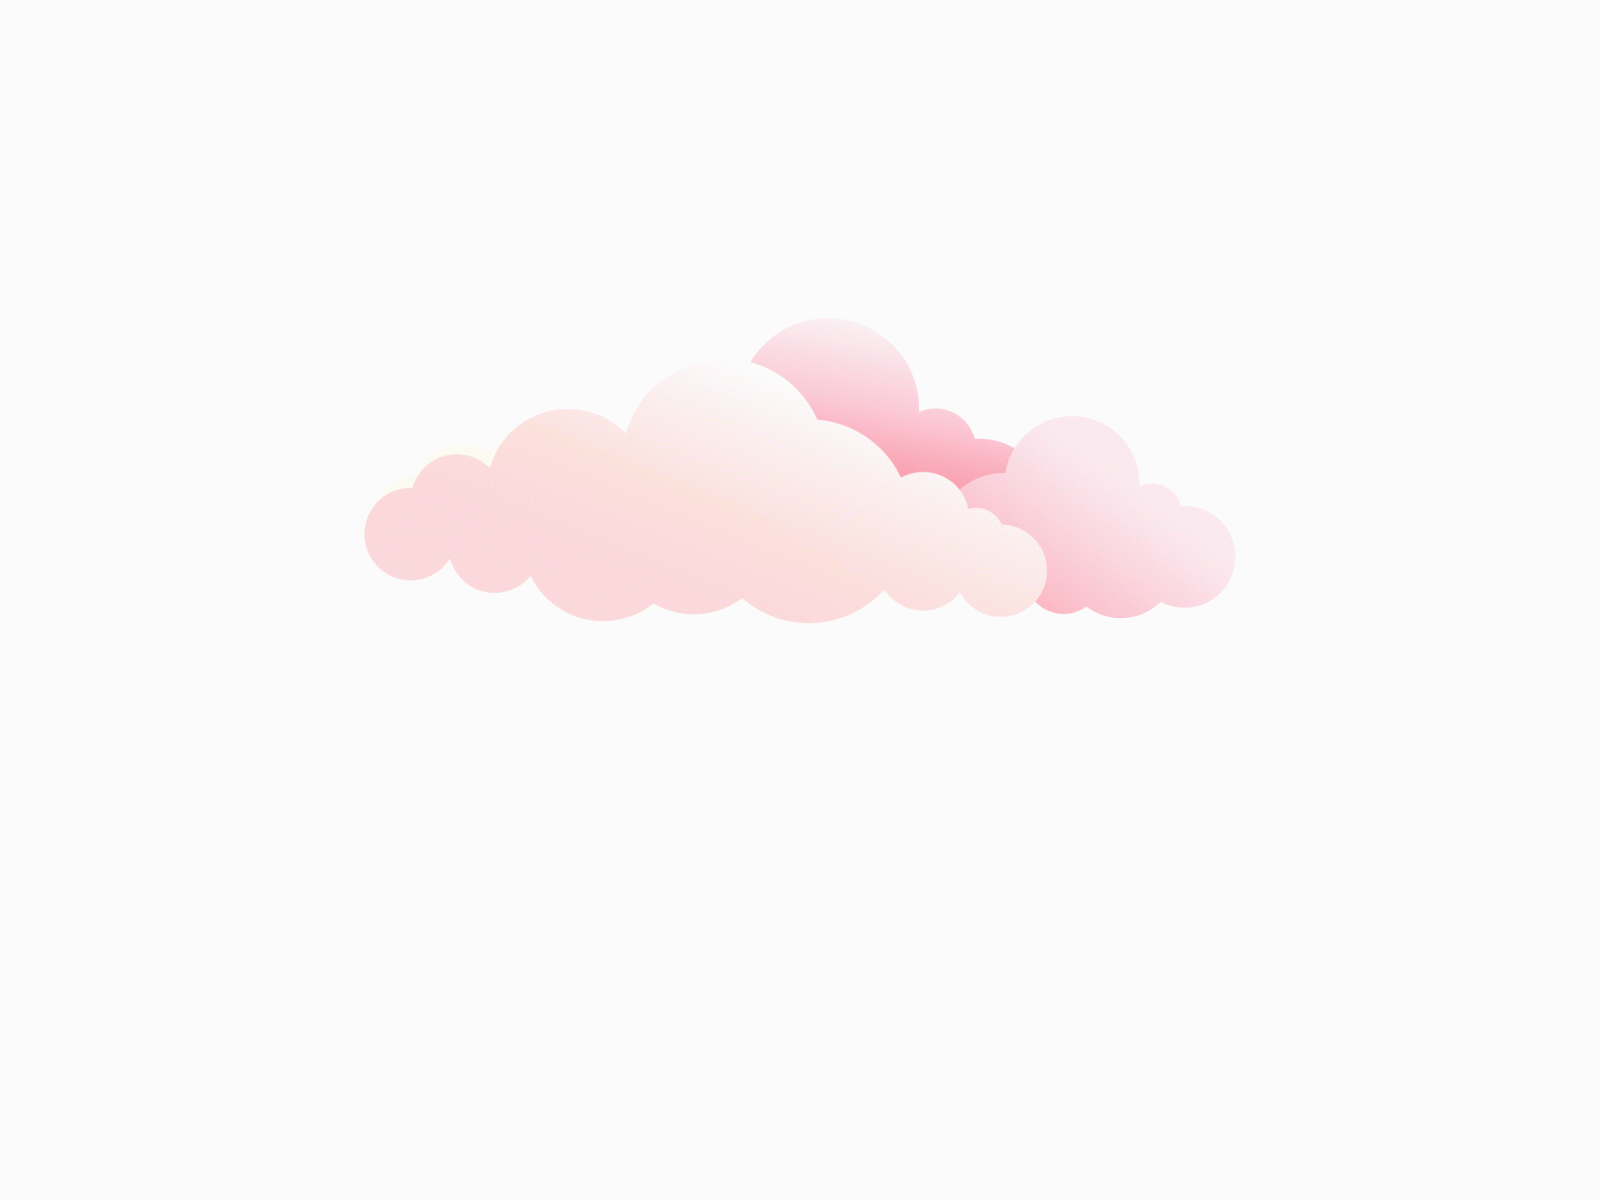 Aesthetic Dreamy Download